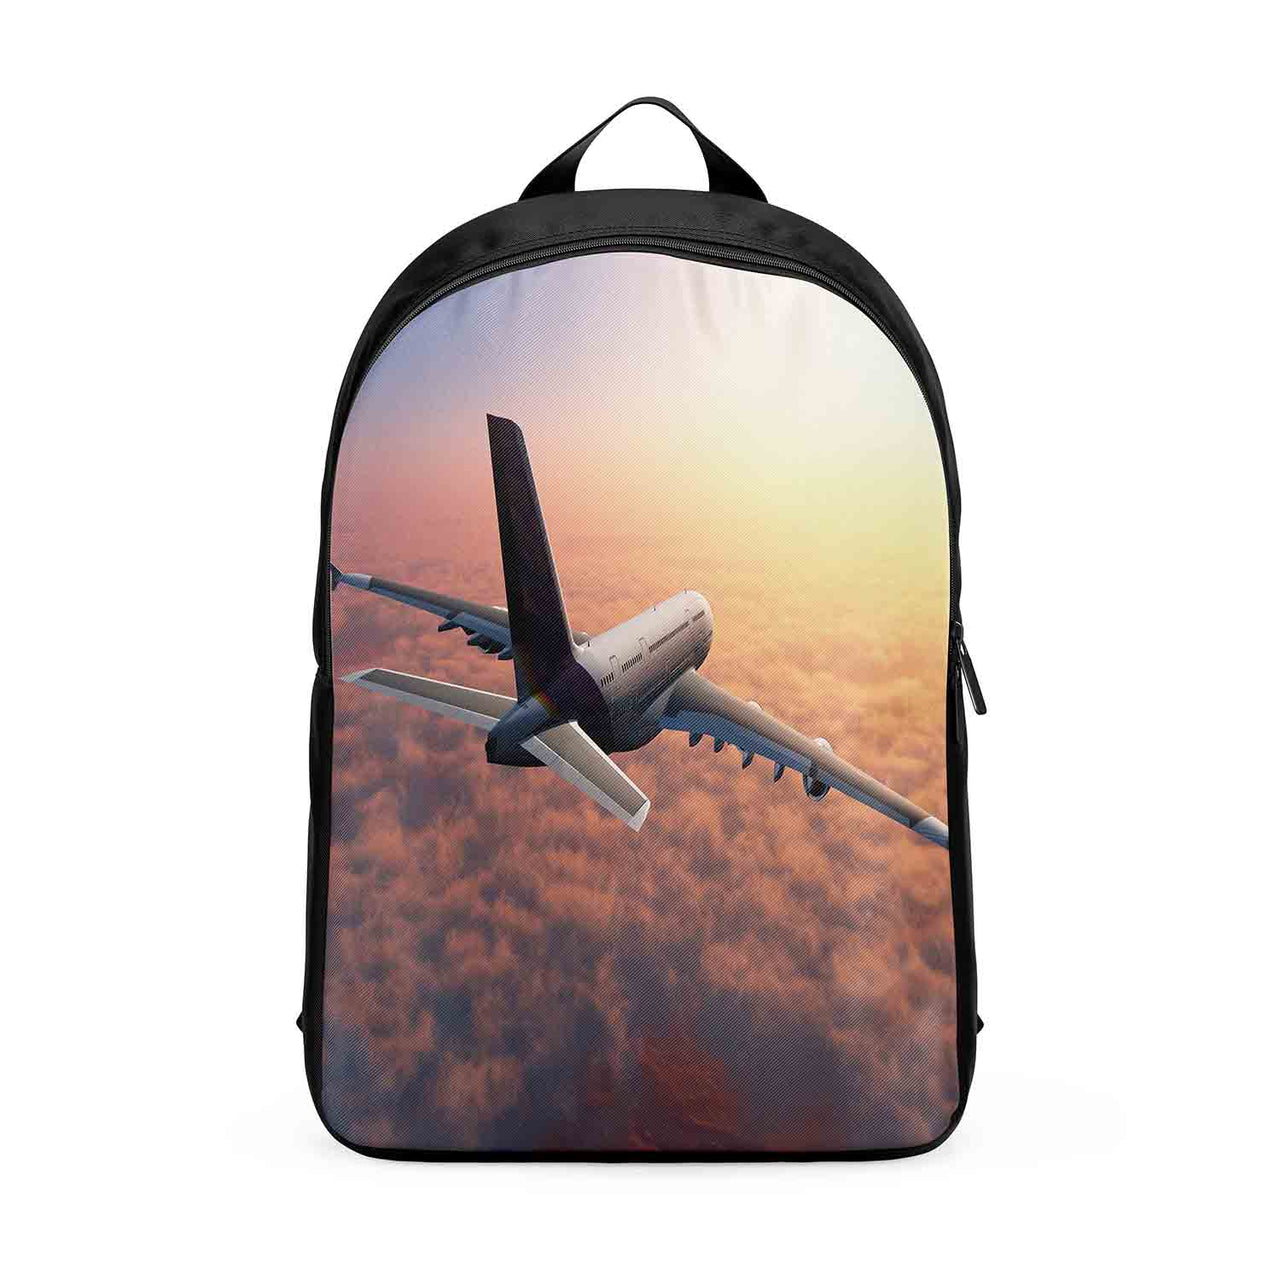 Super Cruising Airbus A380 over Clouds Designed Backpacks